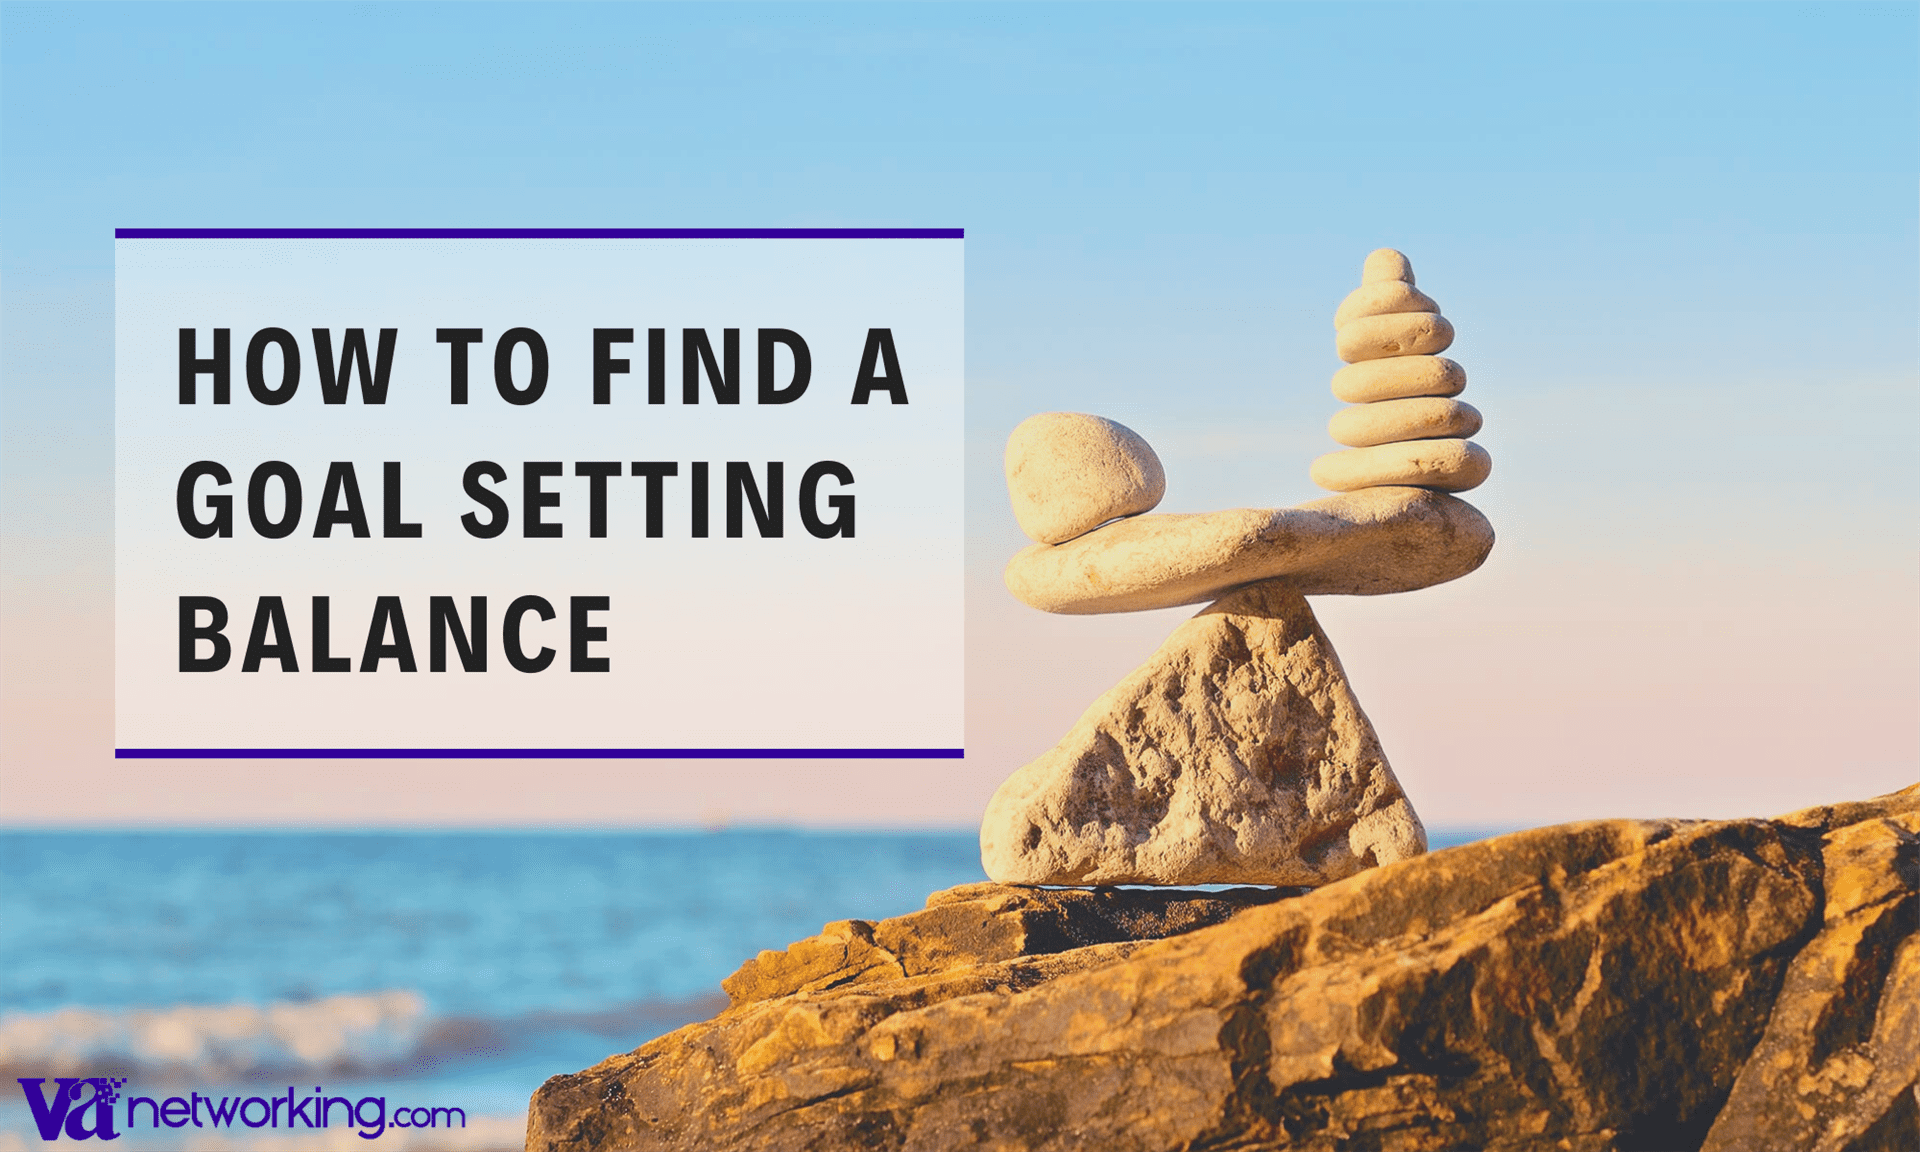 How to Find a Goal Setting Balance